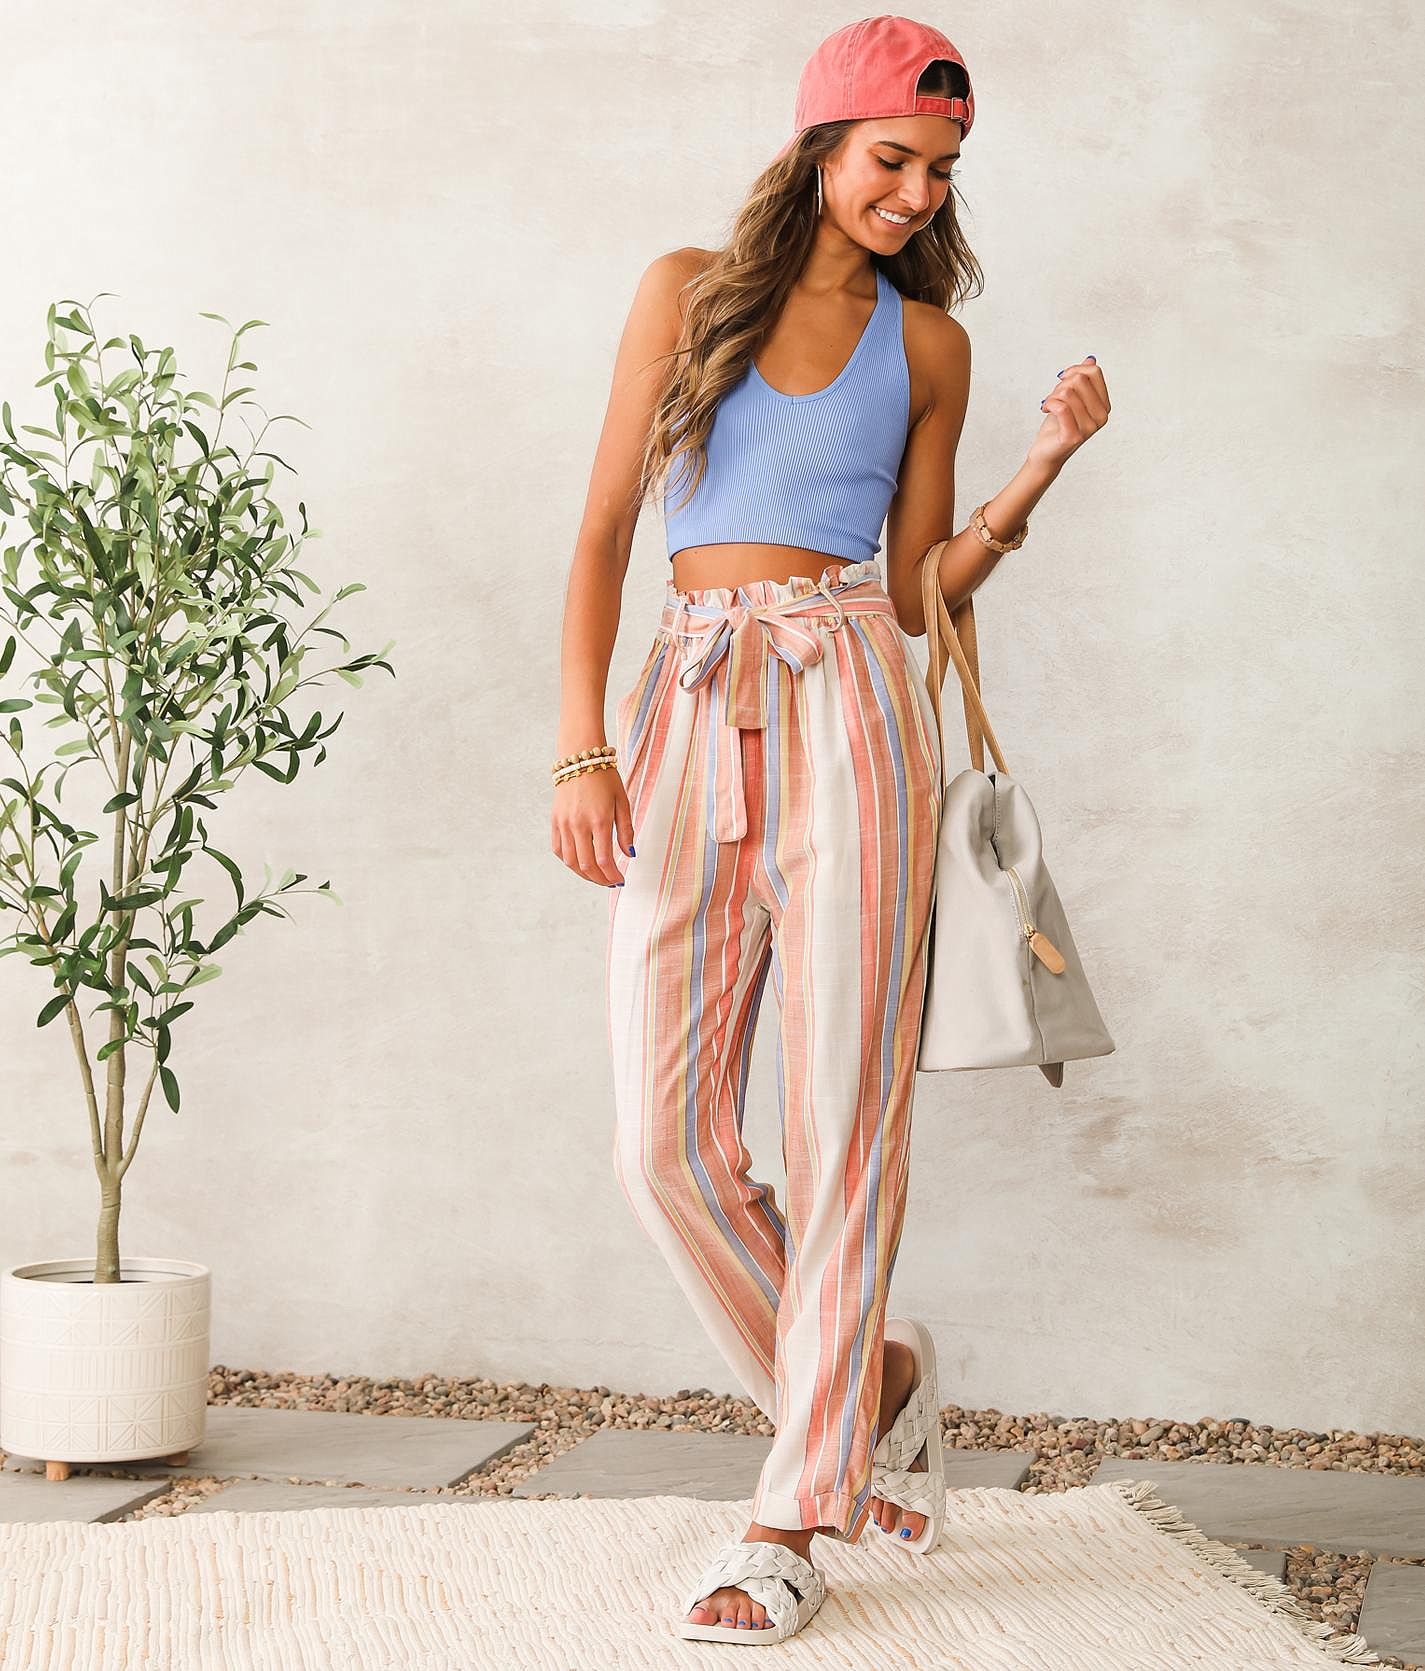 Willow & Root Striped Beach Pant - Women's Pants in Ivory Multi